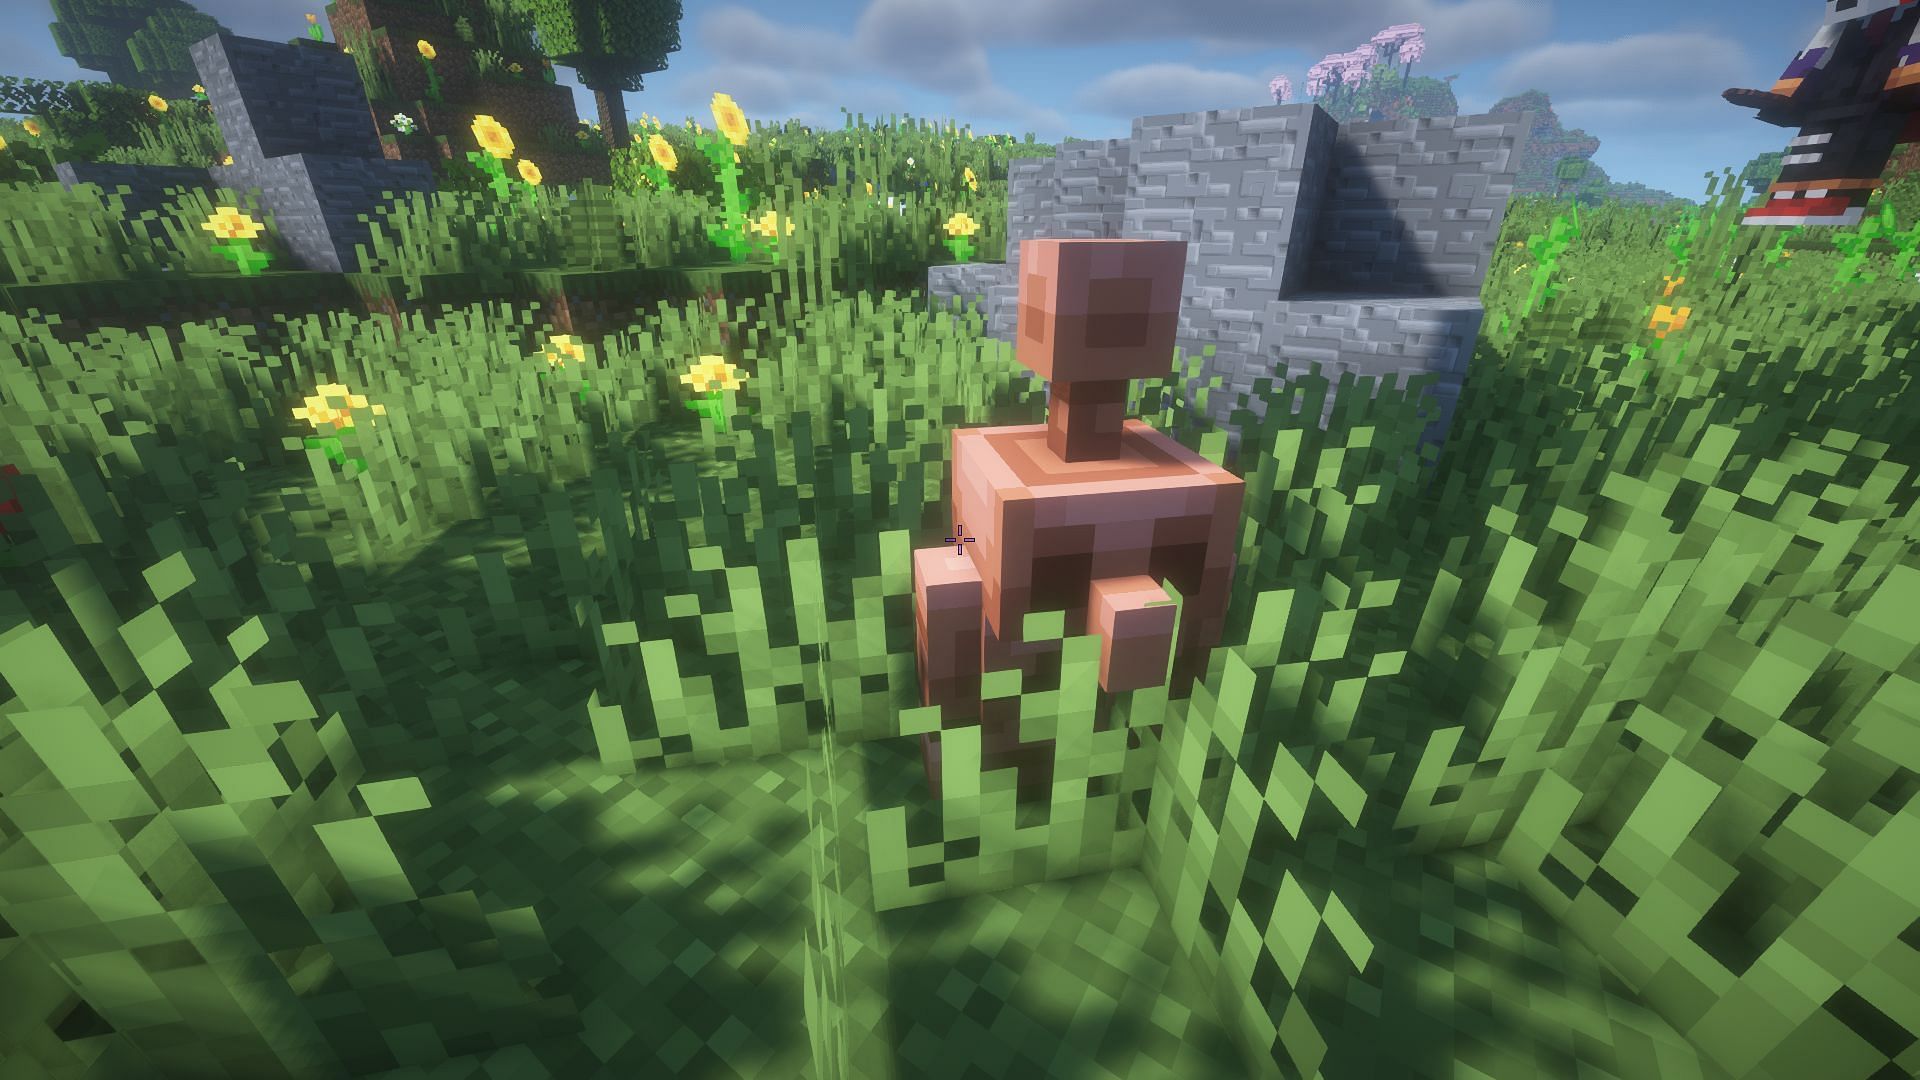 Thankfully, mods have added most of these mobs in already (Image via Mojang)